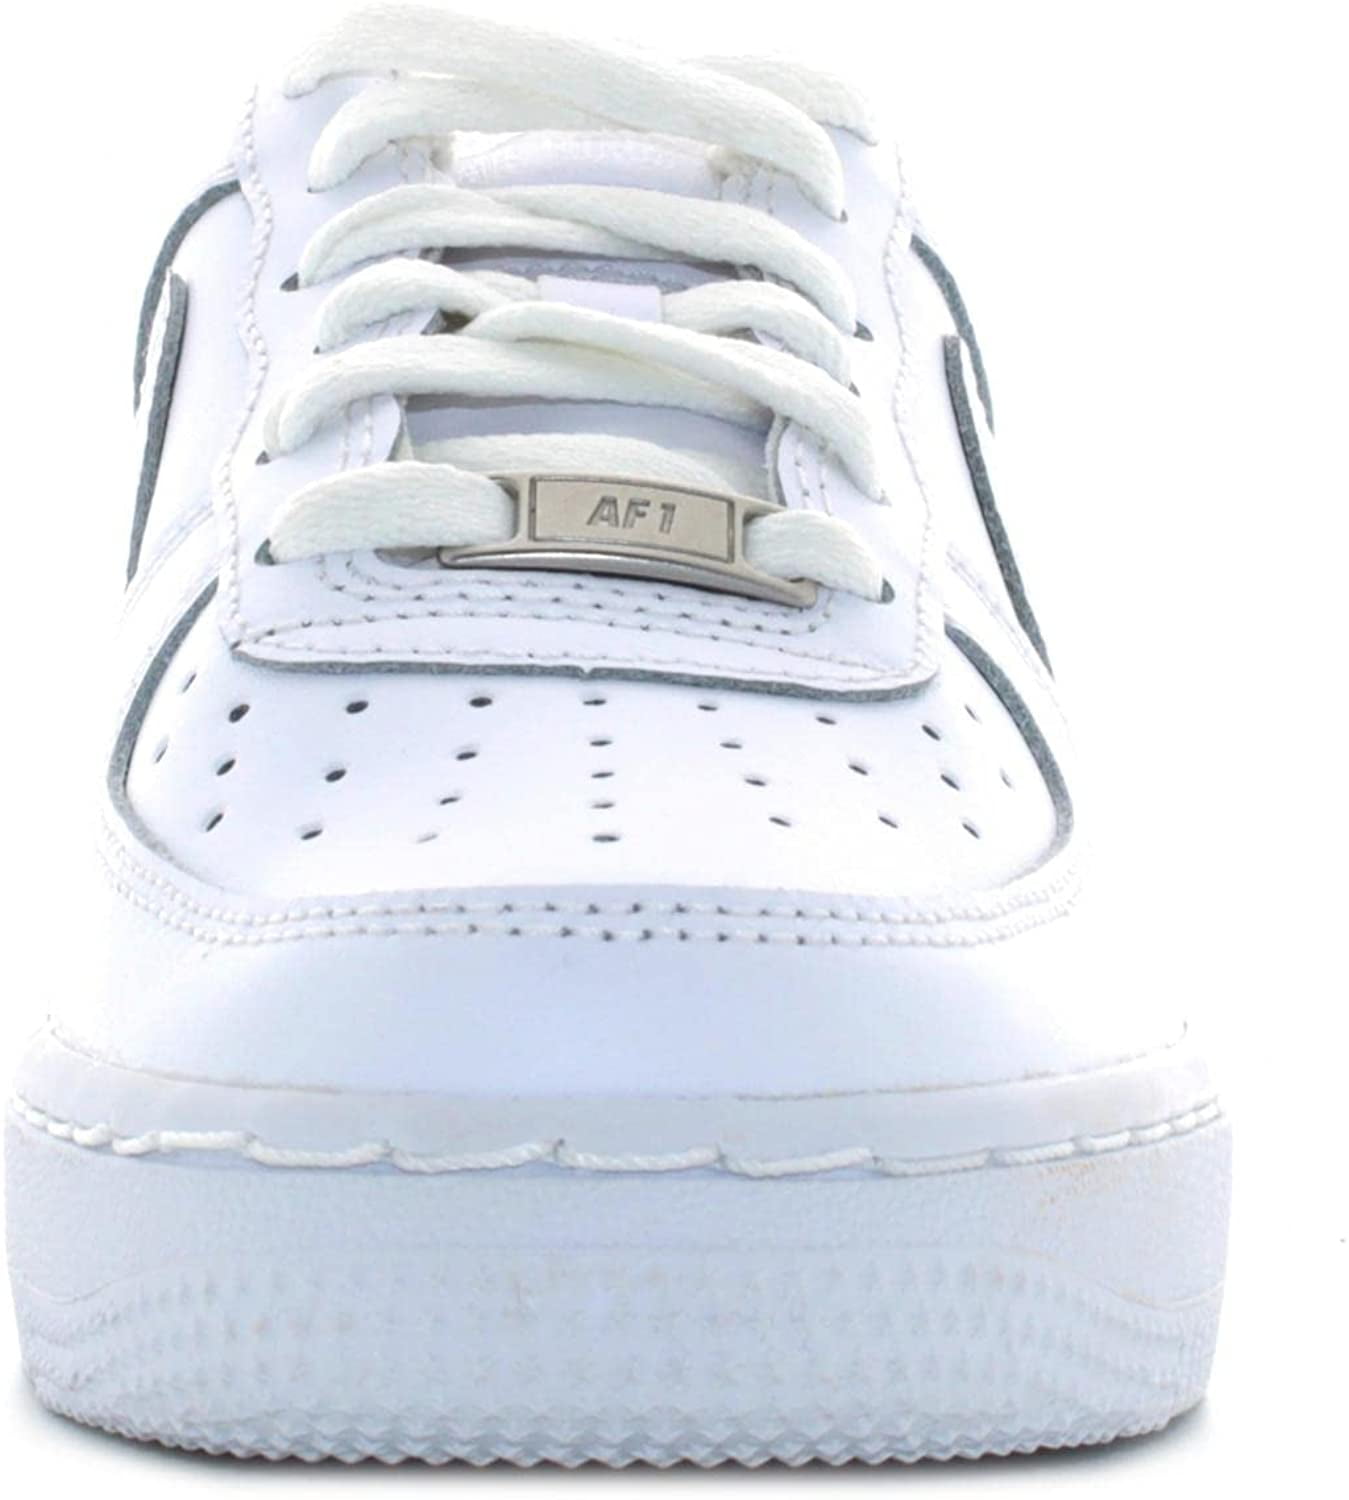 Big Kids' Air Force 1 Low Casual Shoes in White/White Size 6.5 | Leather by Nike